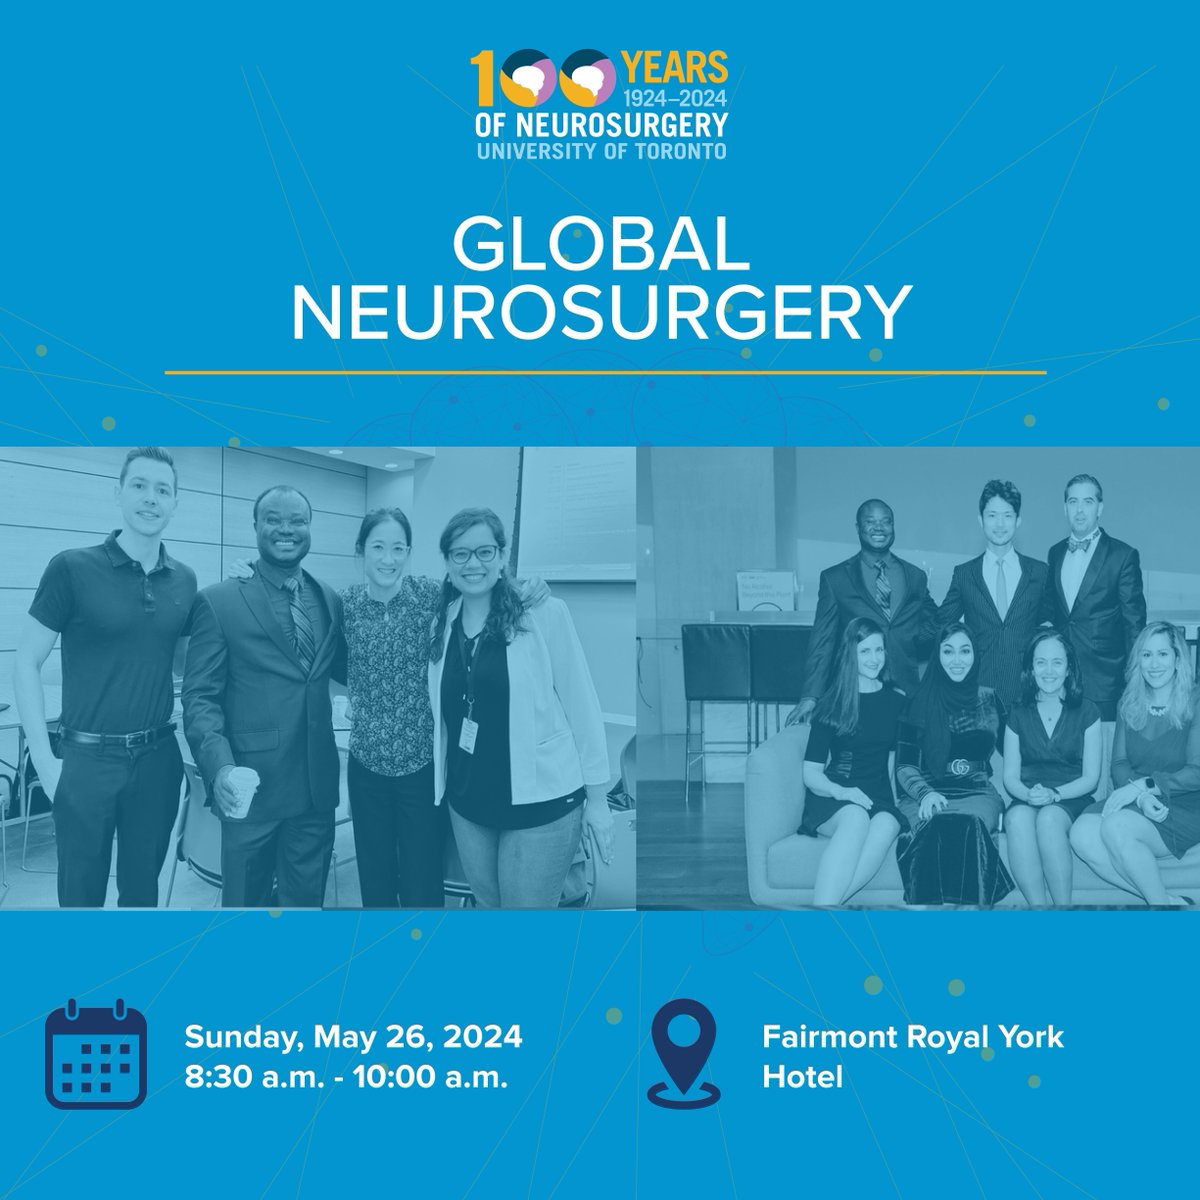 Learn more about #global #neurosurgery with our panel of experts as part of the session on Sunday, May 26, 2024 from 8:30 a.m. - 10:00 a.m.! Find out more about our speakers or register now: bit.ly/3UbvnsC